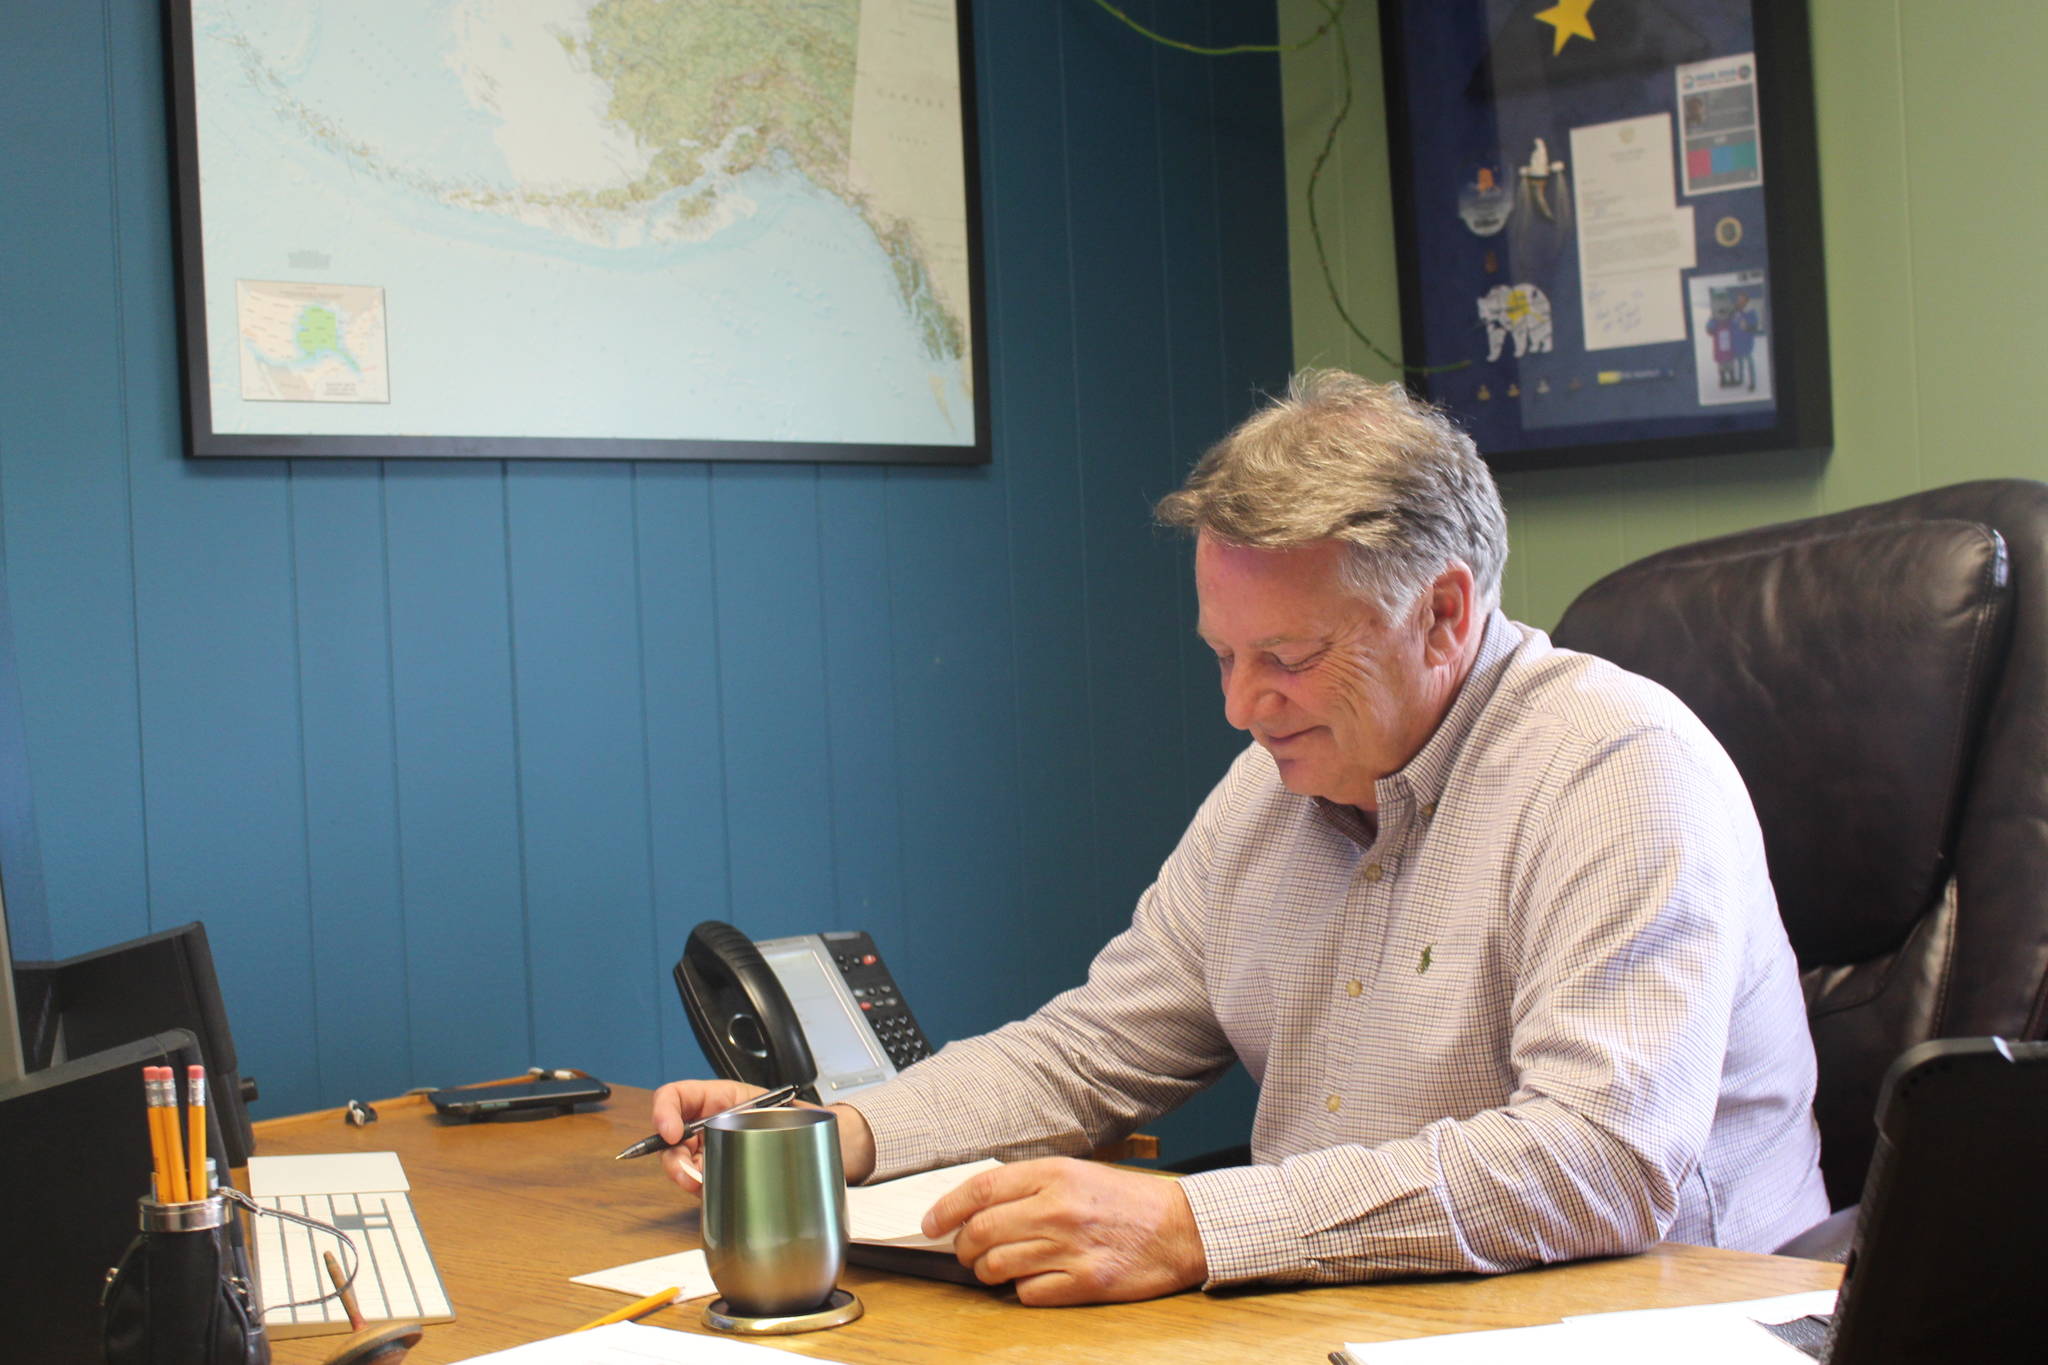 Tim Dillon, executive director of the Kenai Peninsula Economic Development District, is seen here reviewing his proposed changes to the Alaska Legislature regarding the AK CARES funds for small businesses at the KPEDD office in Kenai, Alaska, on July 1, 2020. (Photo by Brian Mazurek/Peninsula Clarion)